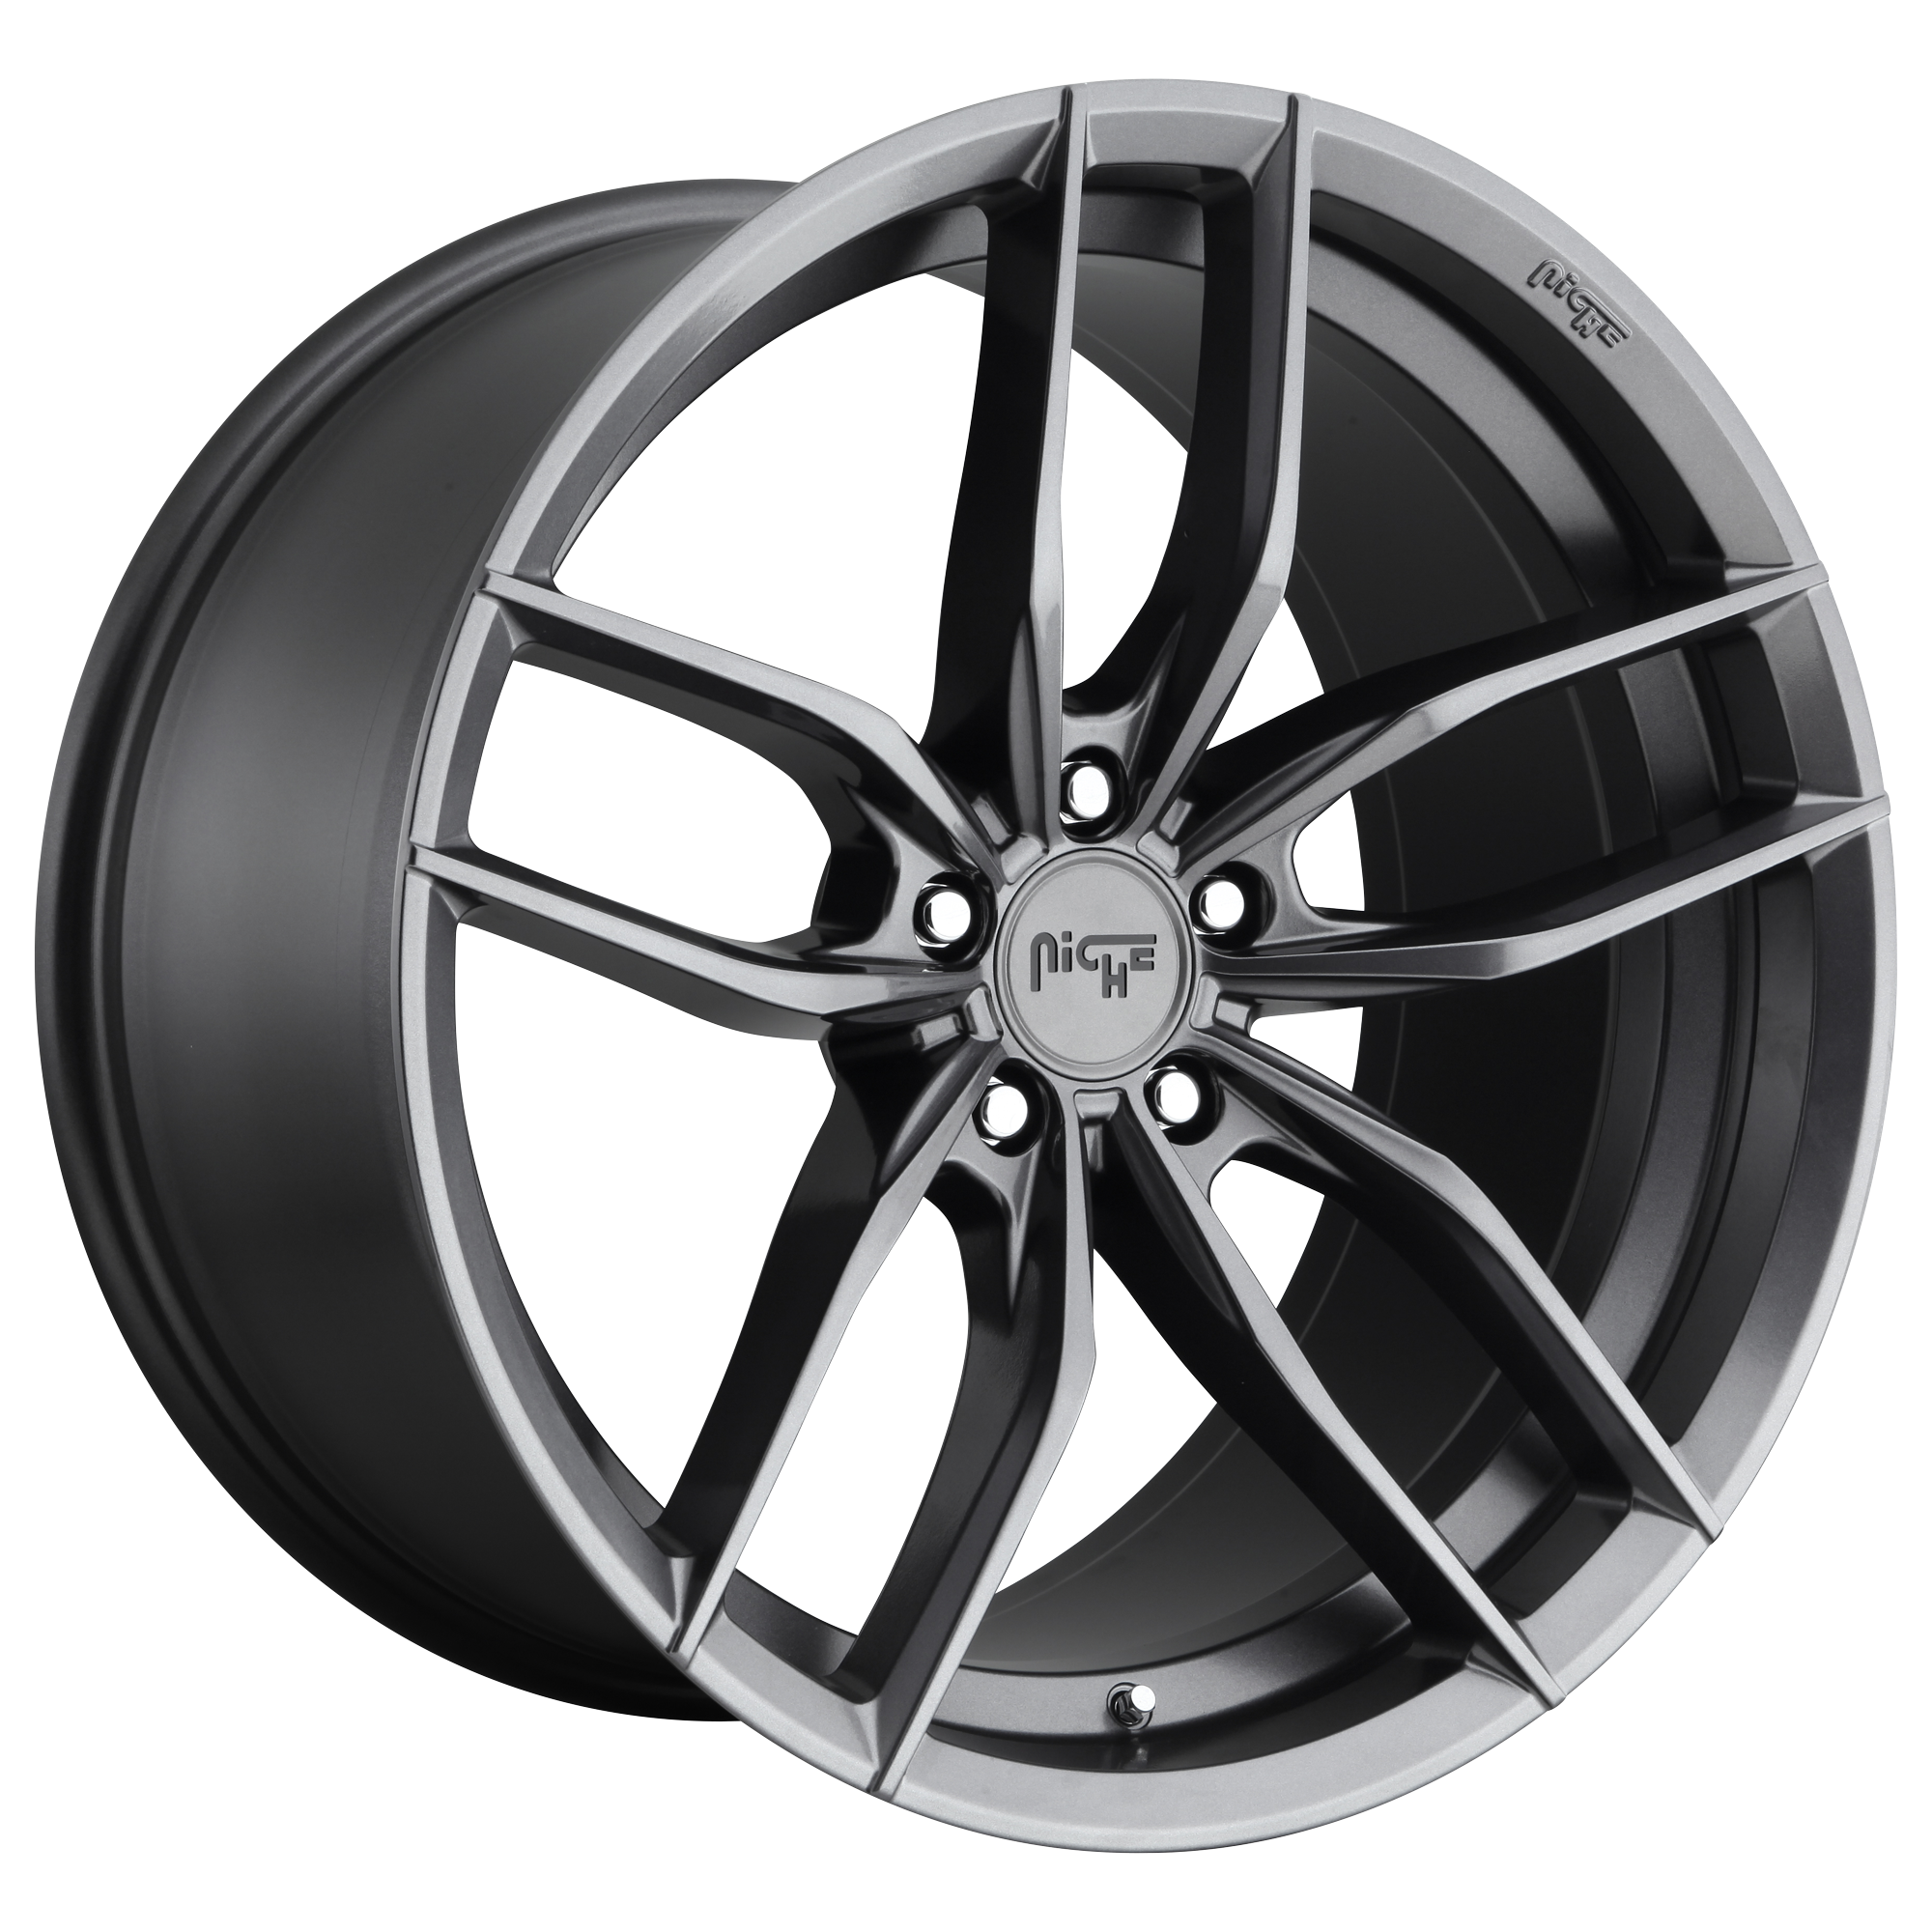 VOSSO 18x9.5 5x120.00 MATTE ANTHRACITE (35 mm) - Tires and Engine Performance